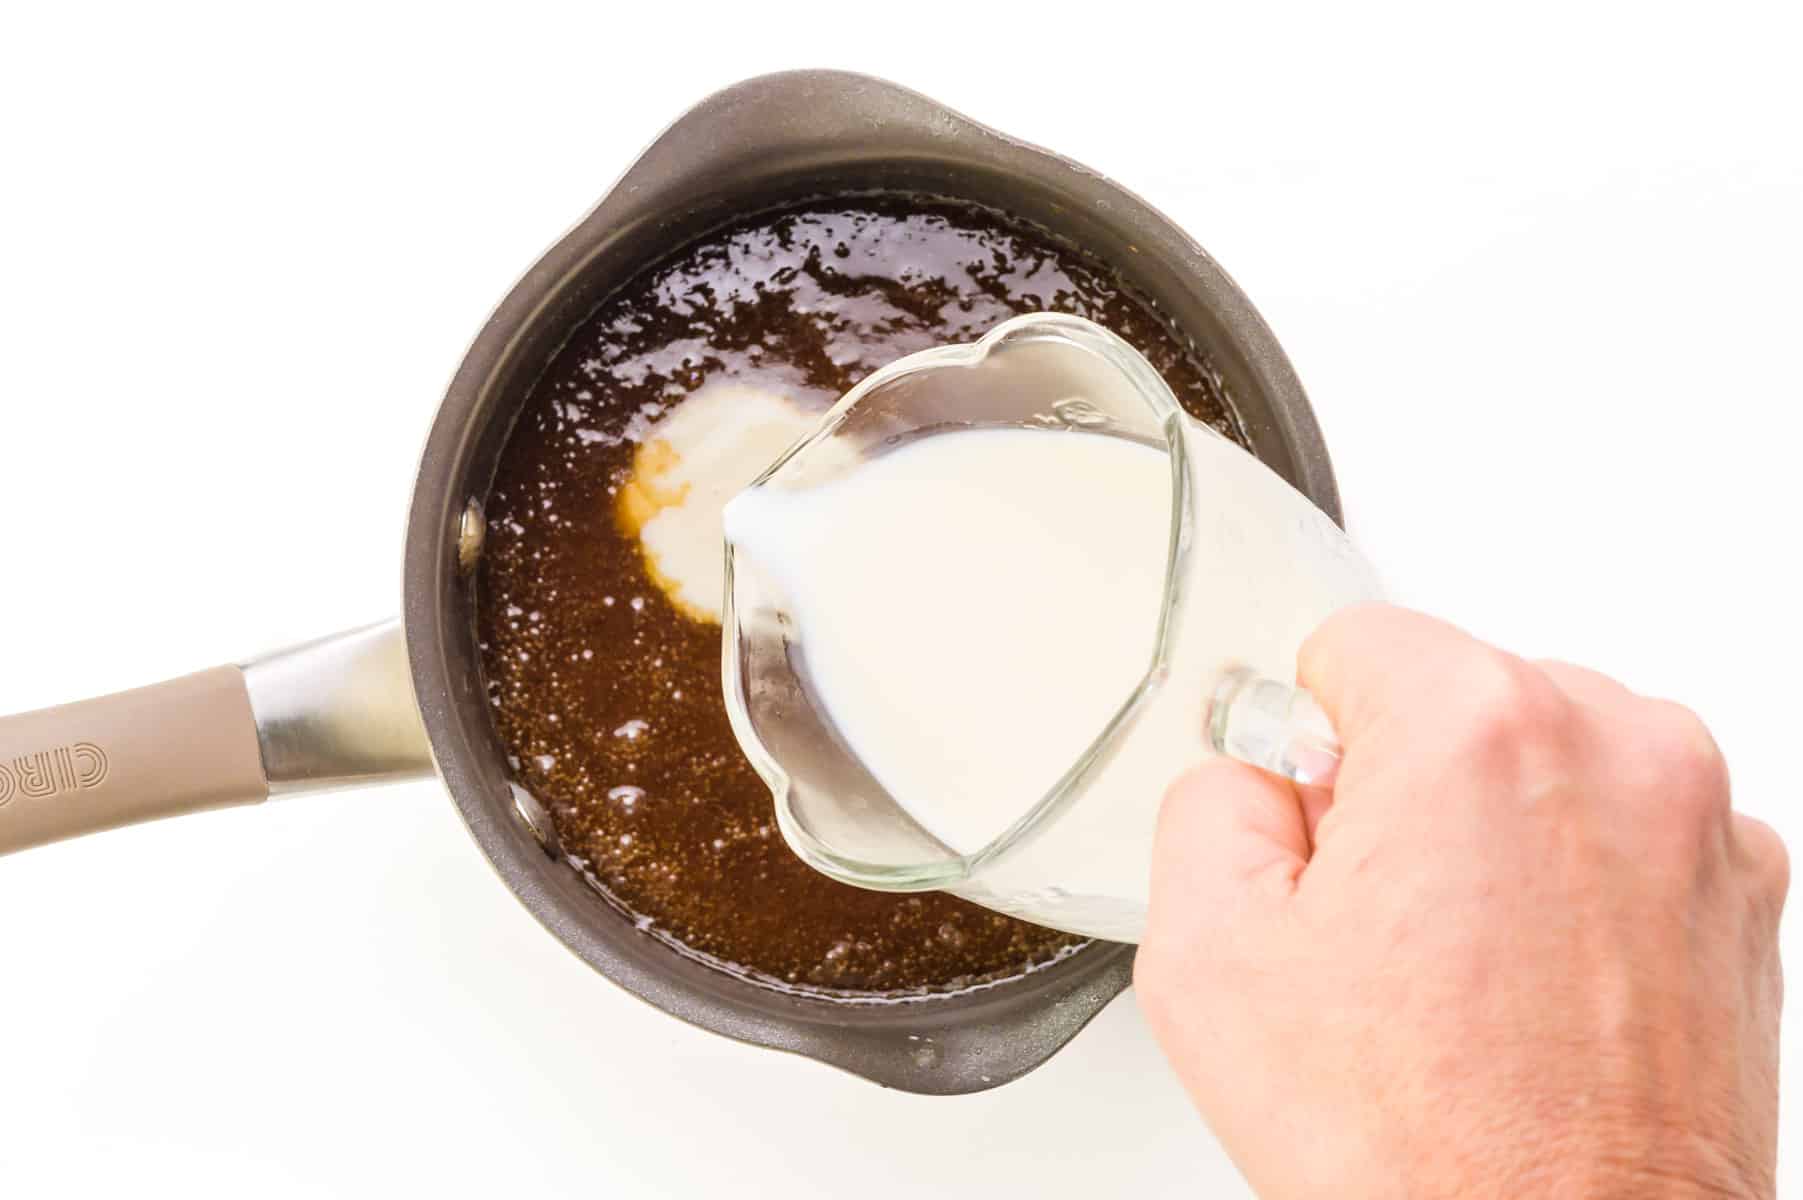 A hand holds a small pitcher of plant-based milk, pouring it into a saucepan full of brown sugar syrup.